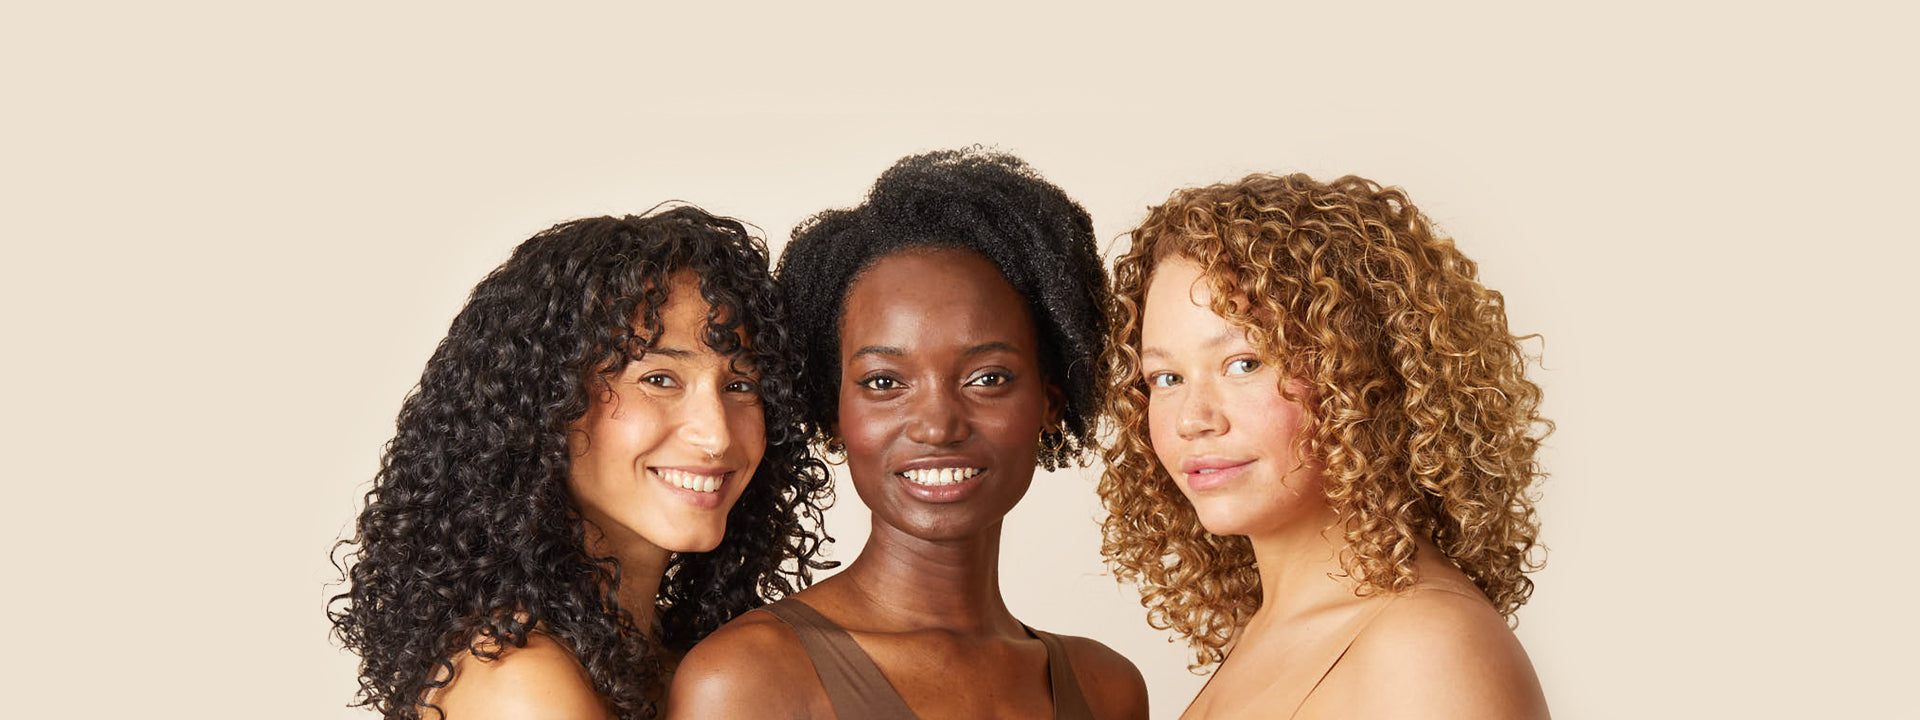 Three smiling women with curly hair posing for the camera